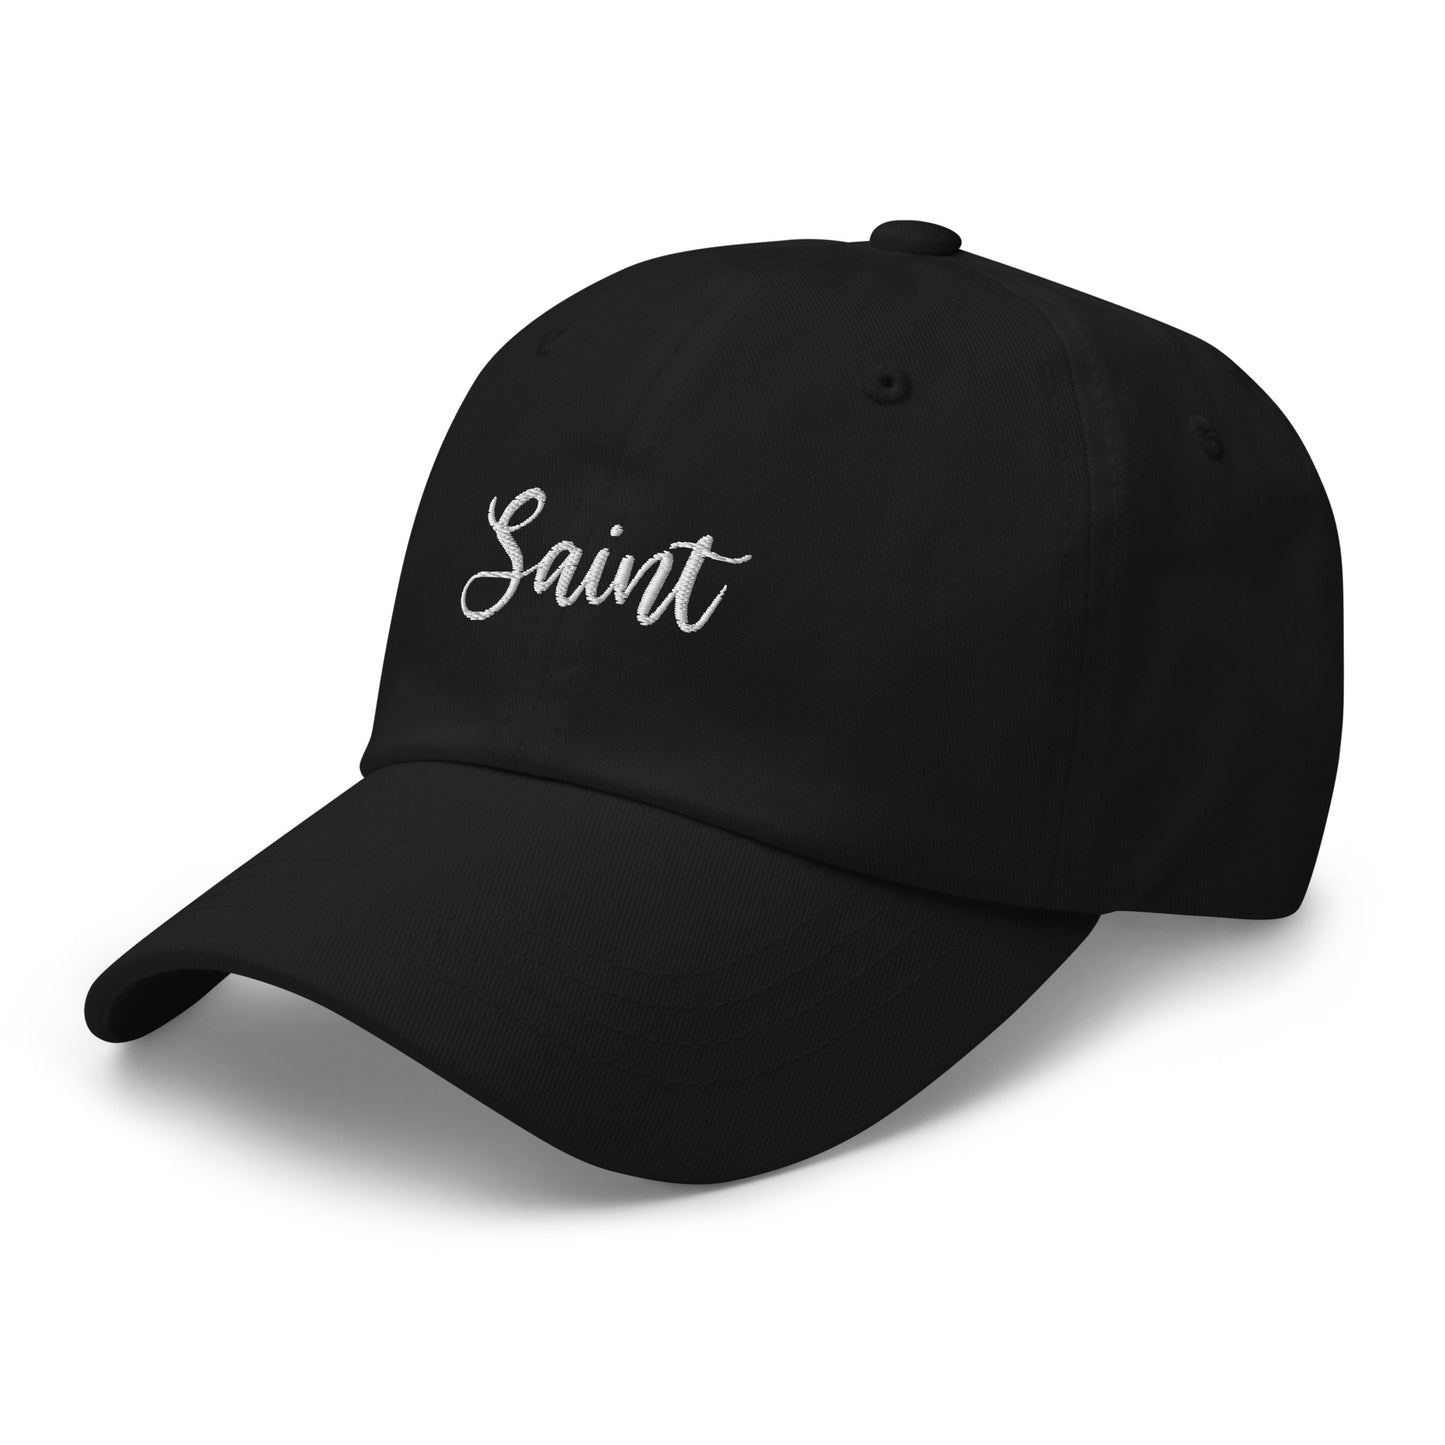 Pick Six Nickname Embroidered Dad hat